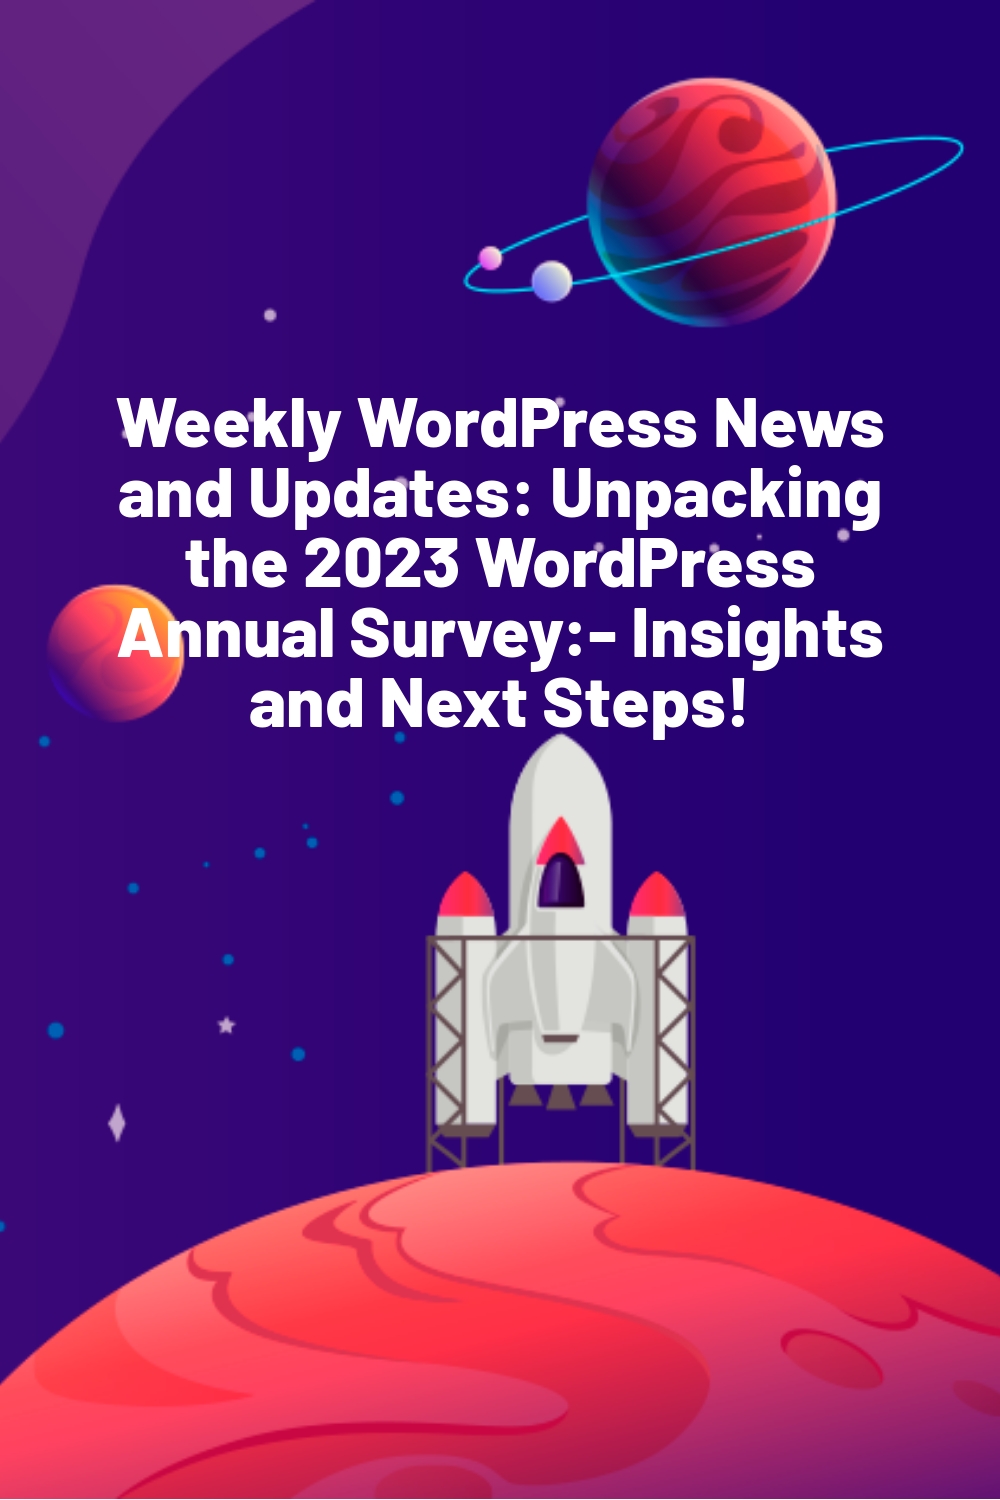 Weekly WordPress News and Updates: Unpacking the 2023 WordPress Annual Survey:- Insights and Next Steps!